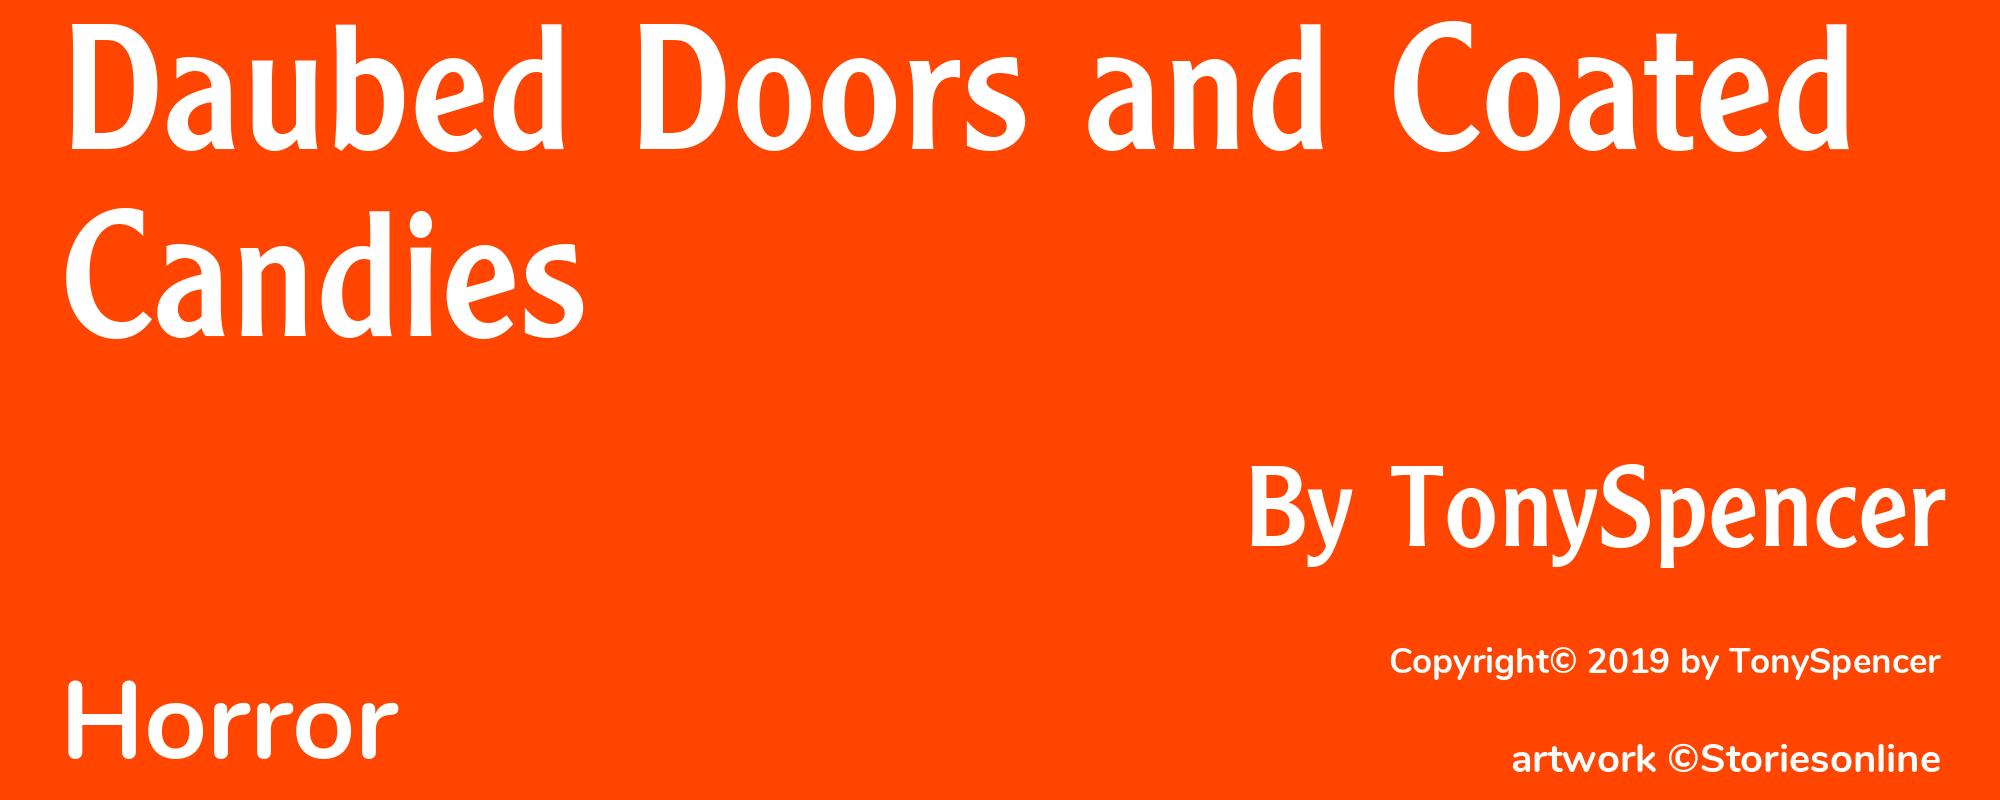 Daubed Doors and Coated Candies - Cover